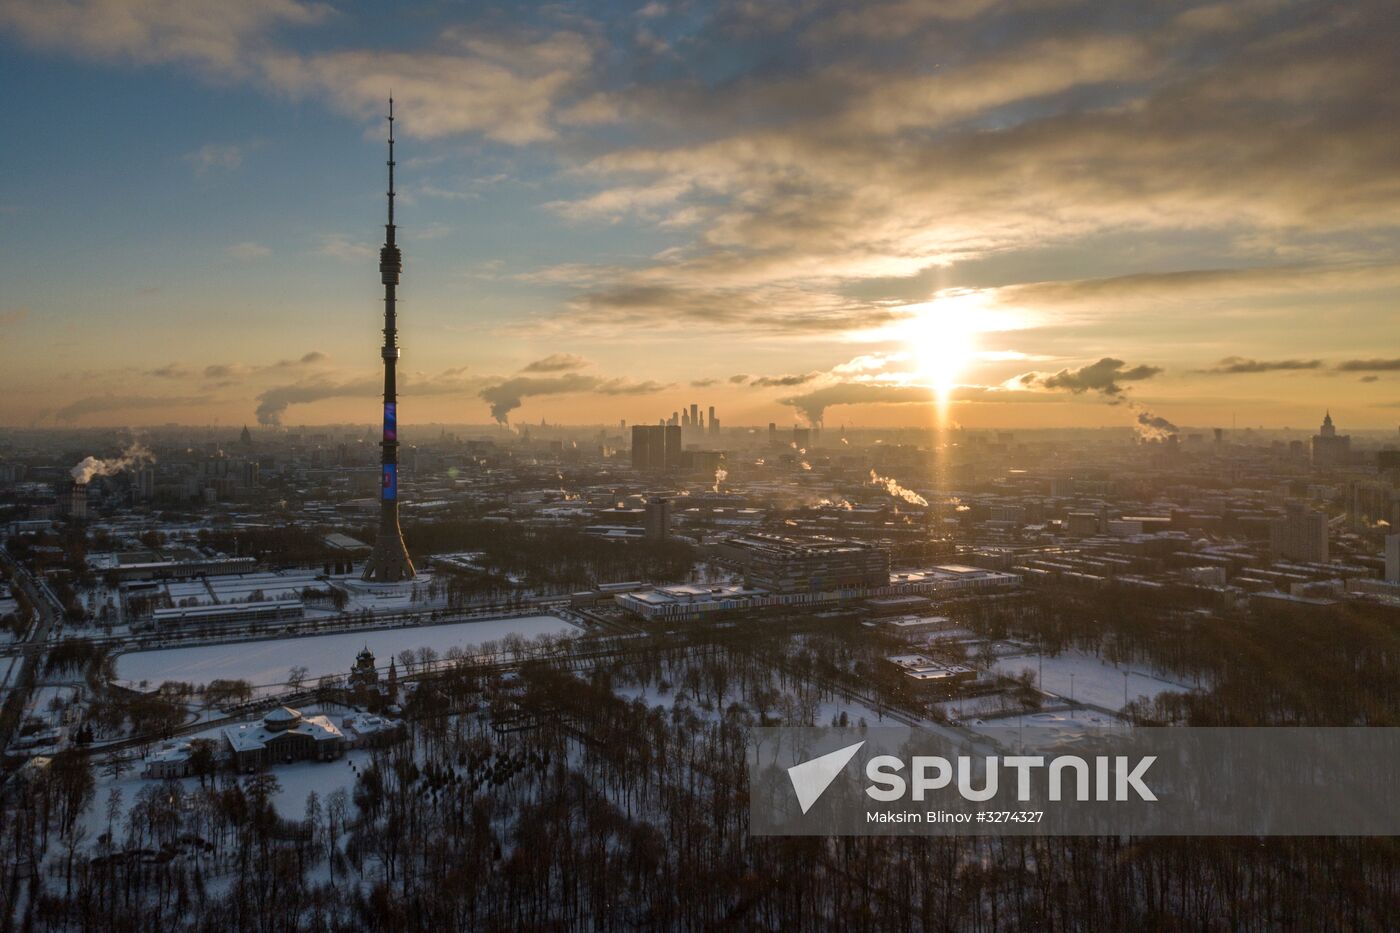 The Ostankino television tower